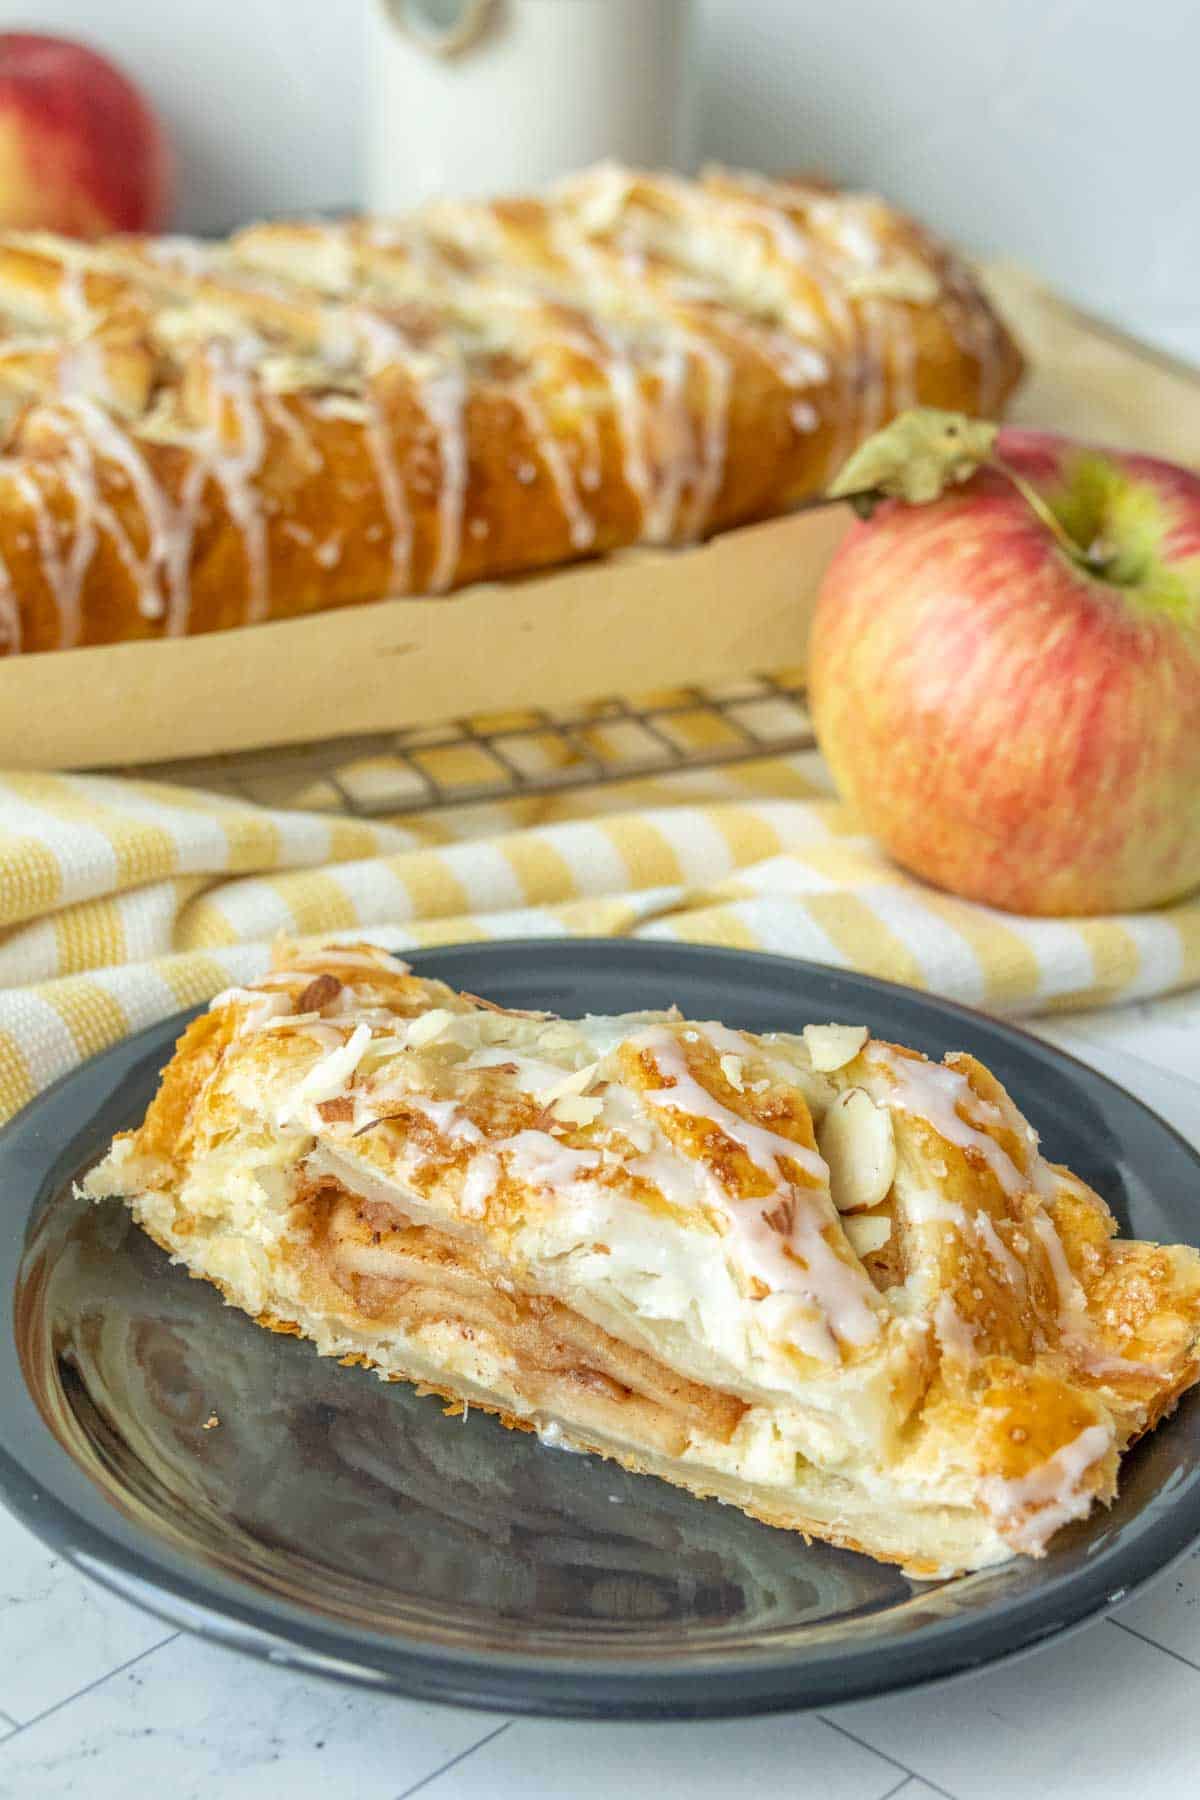 A slice of apple danish on a plate.